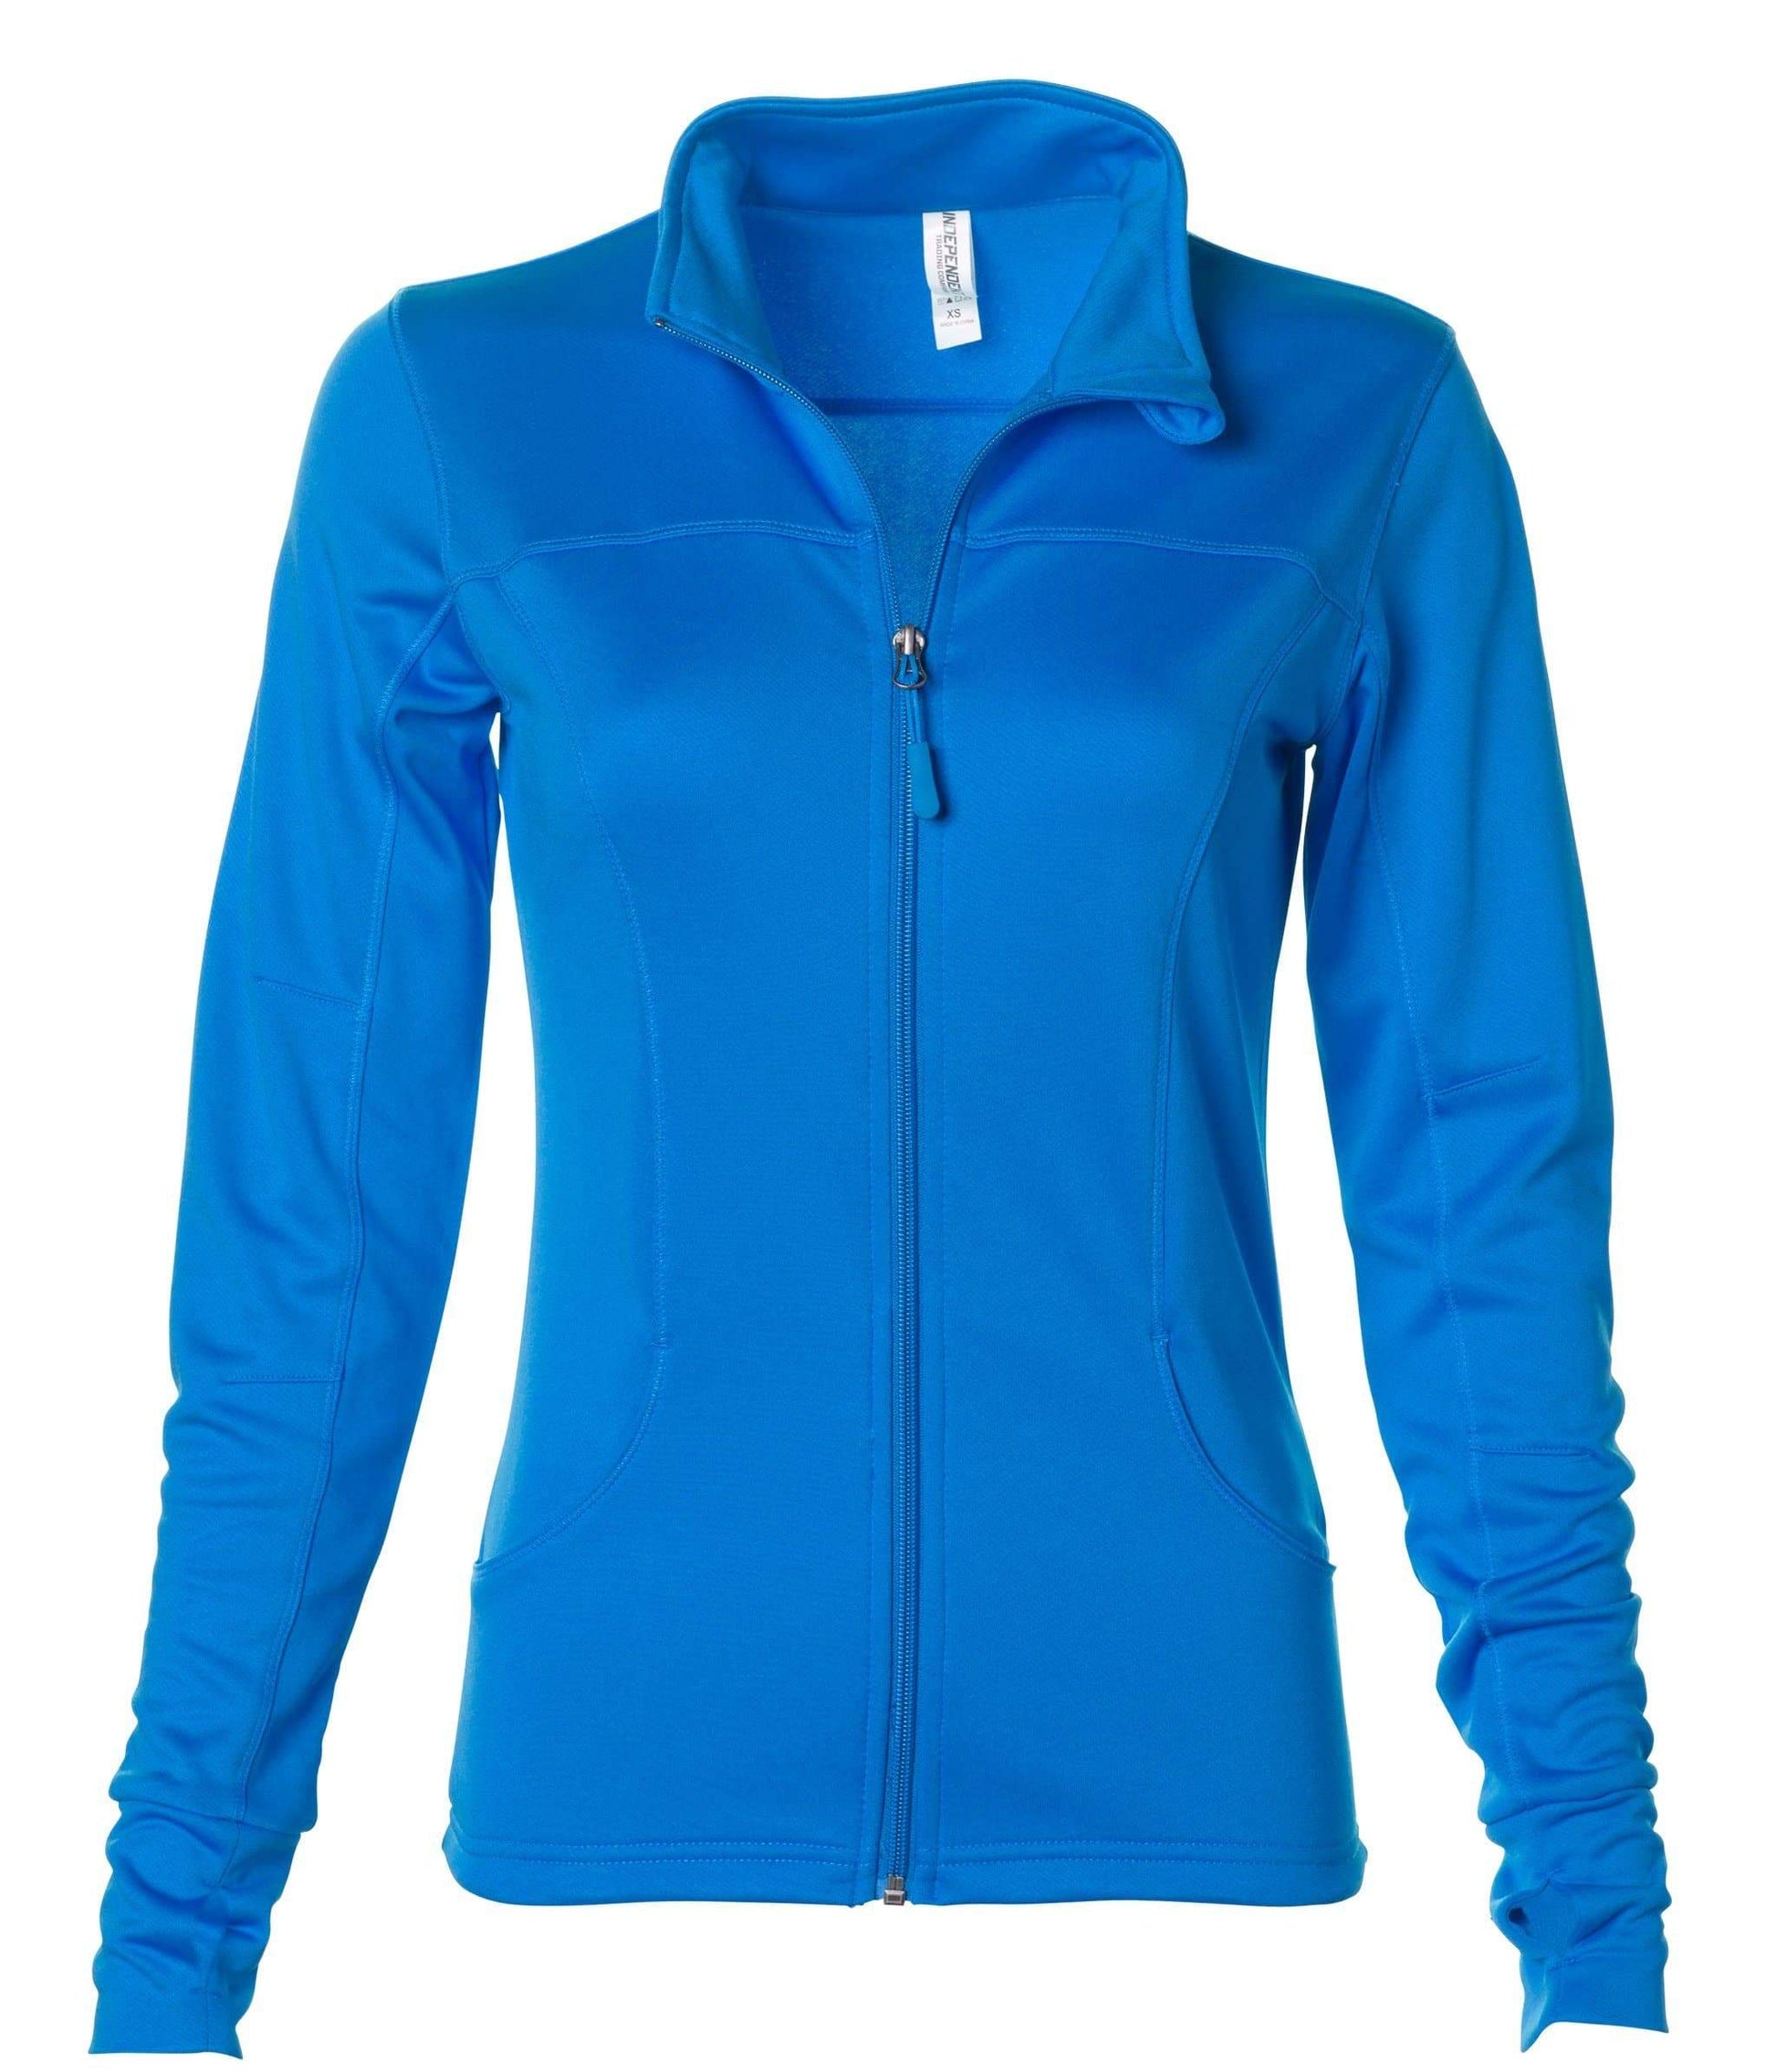 EXP60PAZ - Womens Polyester Athlectic Zip ZIPS